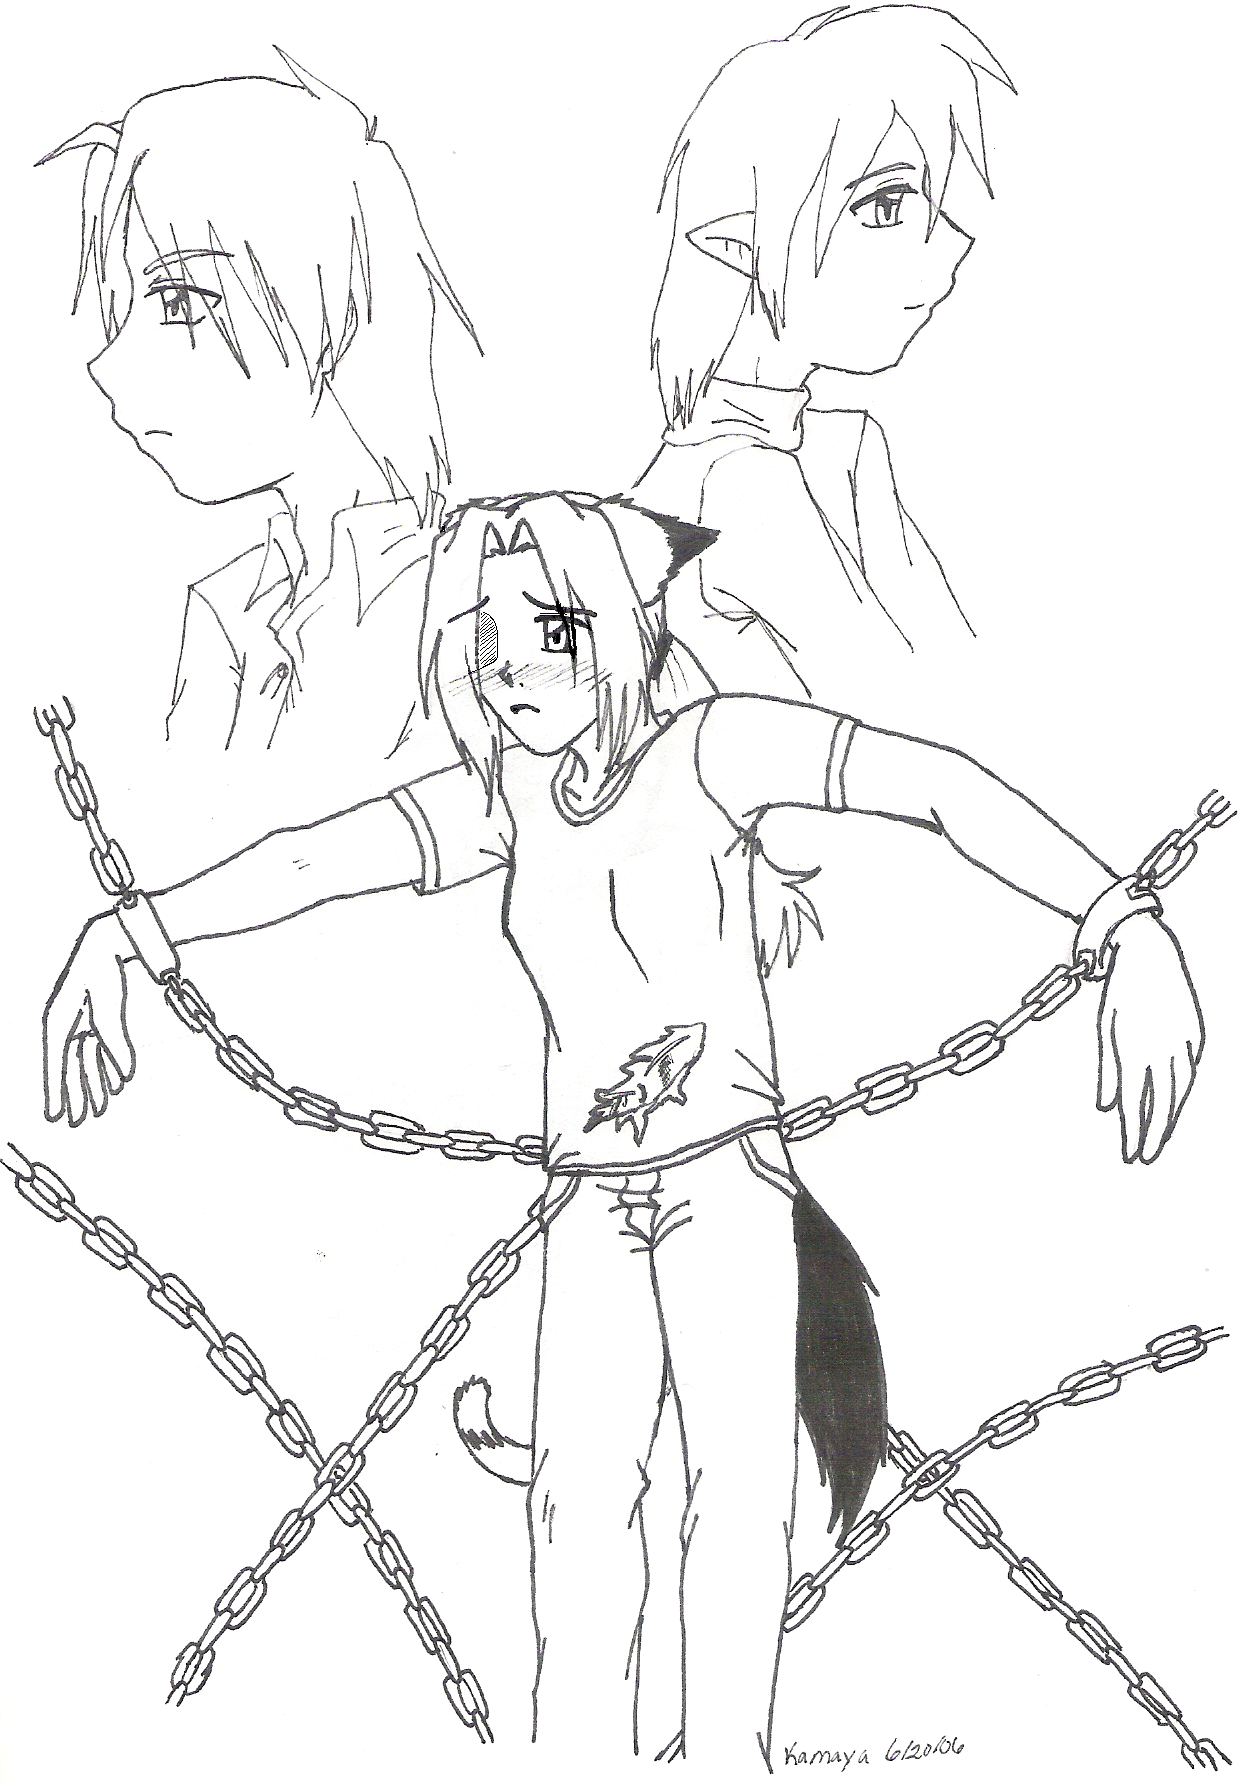 Chained by Yourself by Kamaya_the_Cat